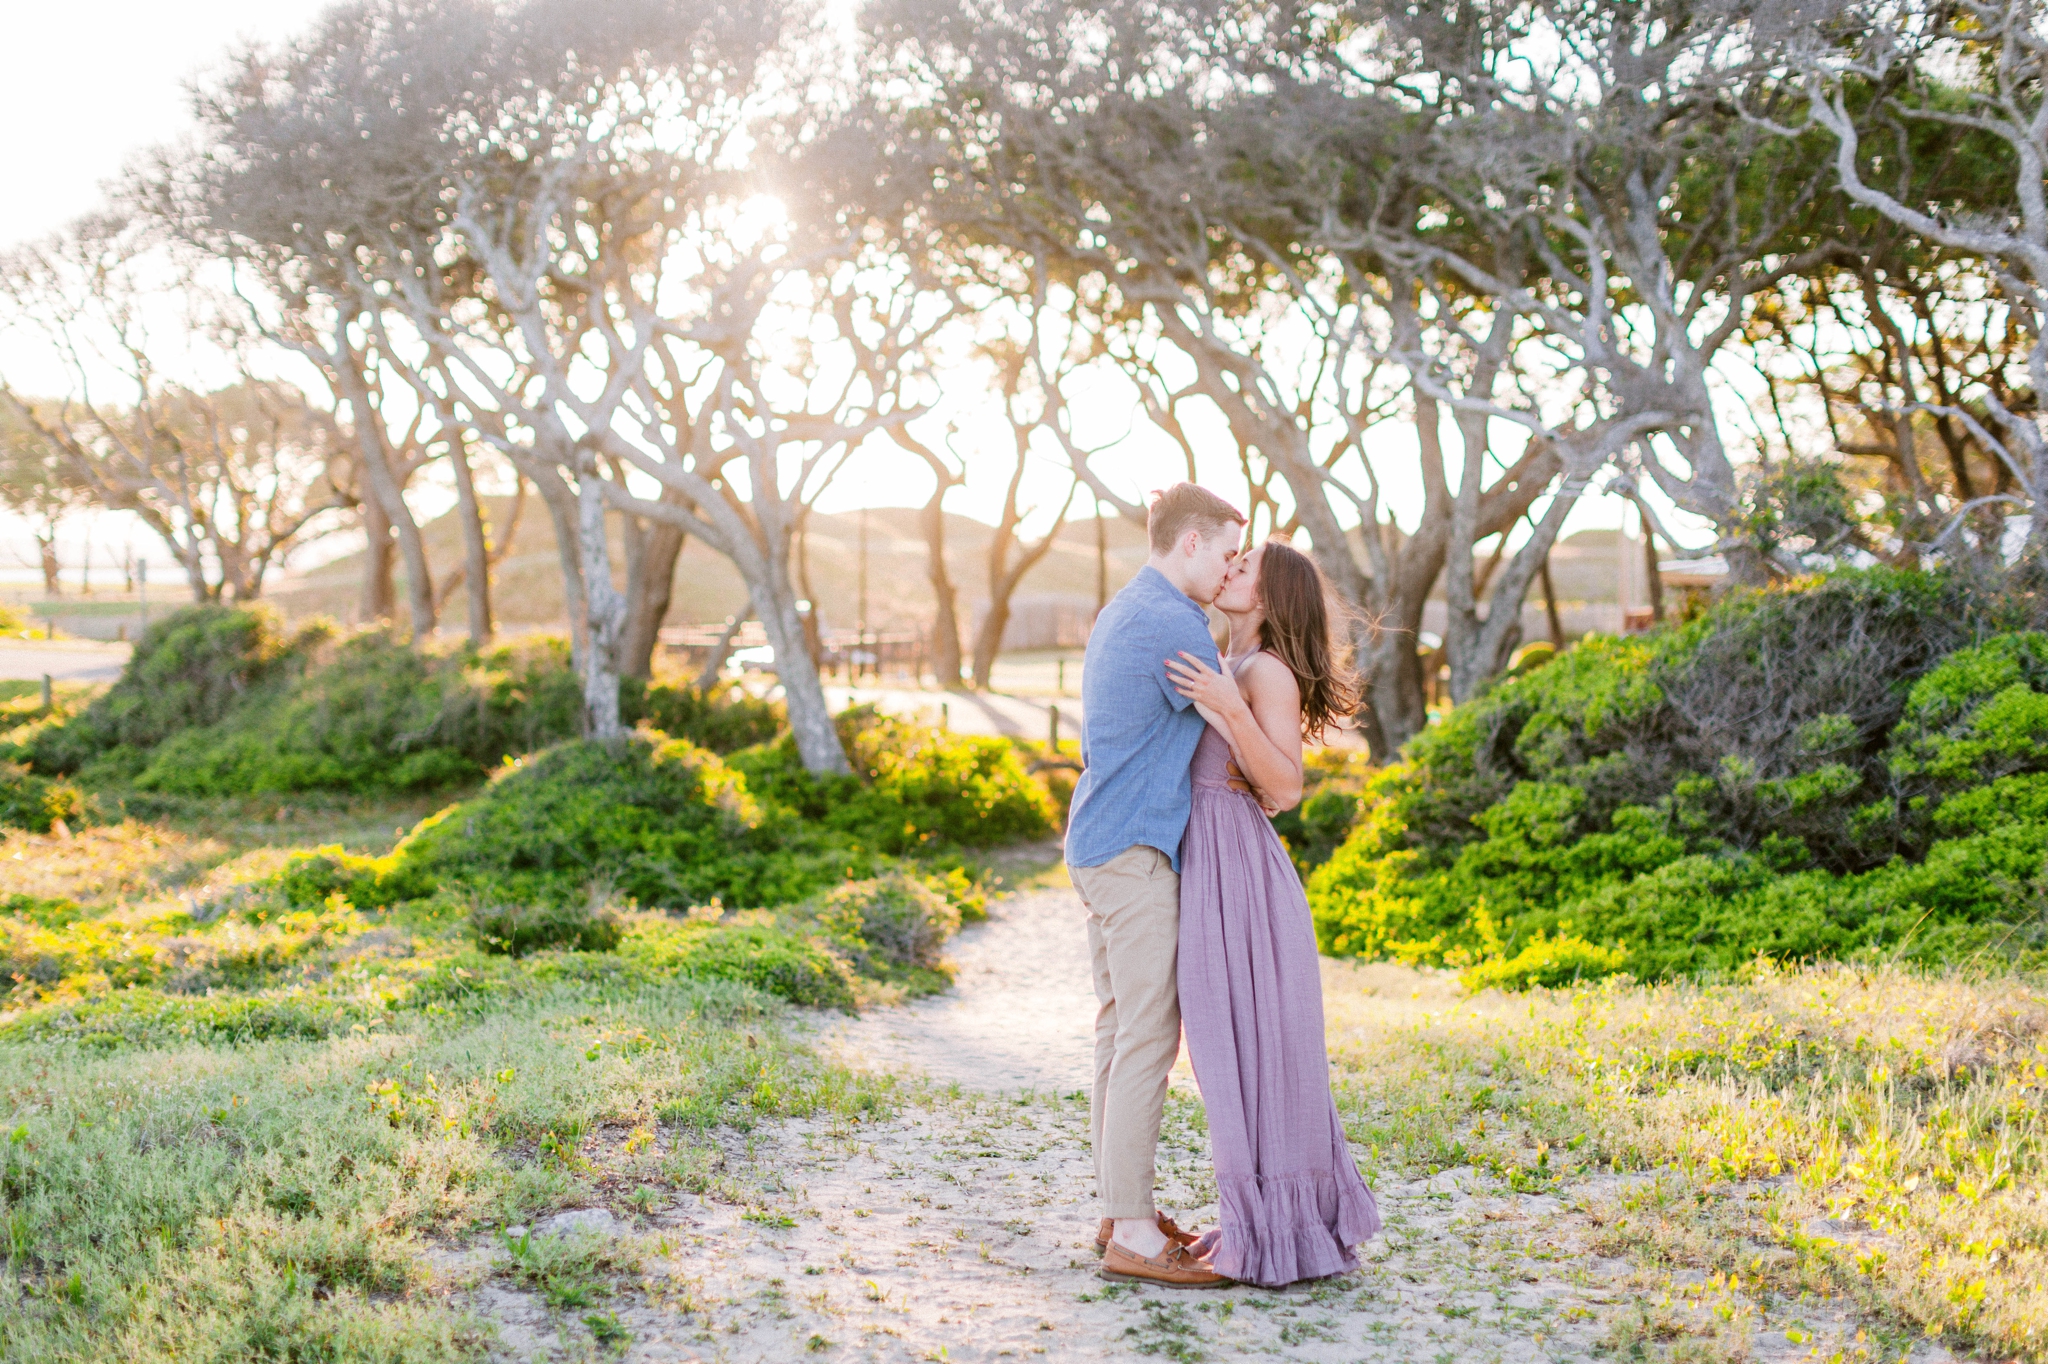  Guy dancing with girl in front of live oak trees with the sunset behind them - Woman is in a flowy pastel maxi dress - unposed and candid outdoor golden light session - engagement photographer in honolulu, oahu, hawaii - johanna dye photography 